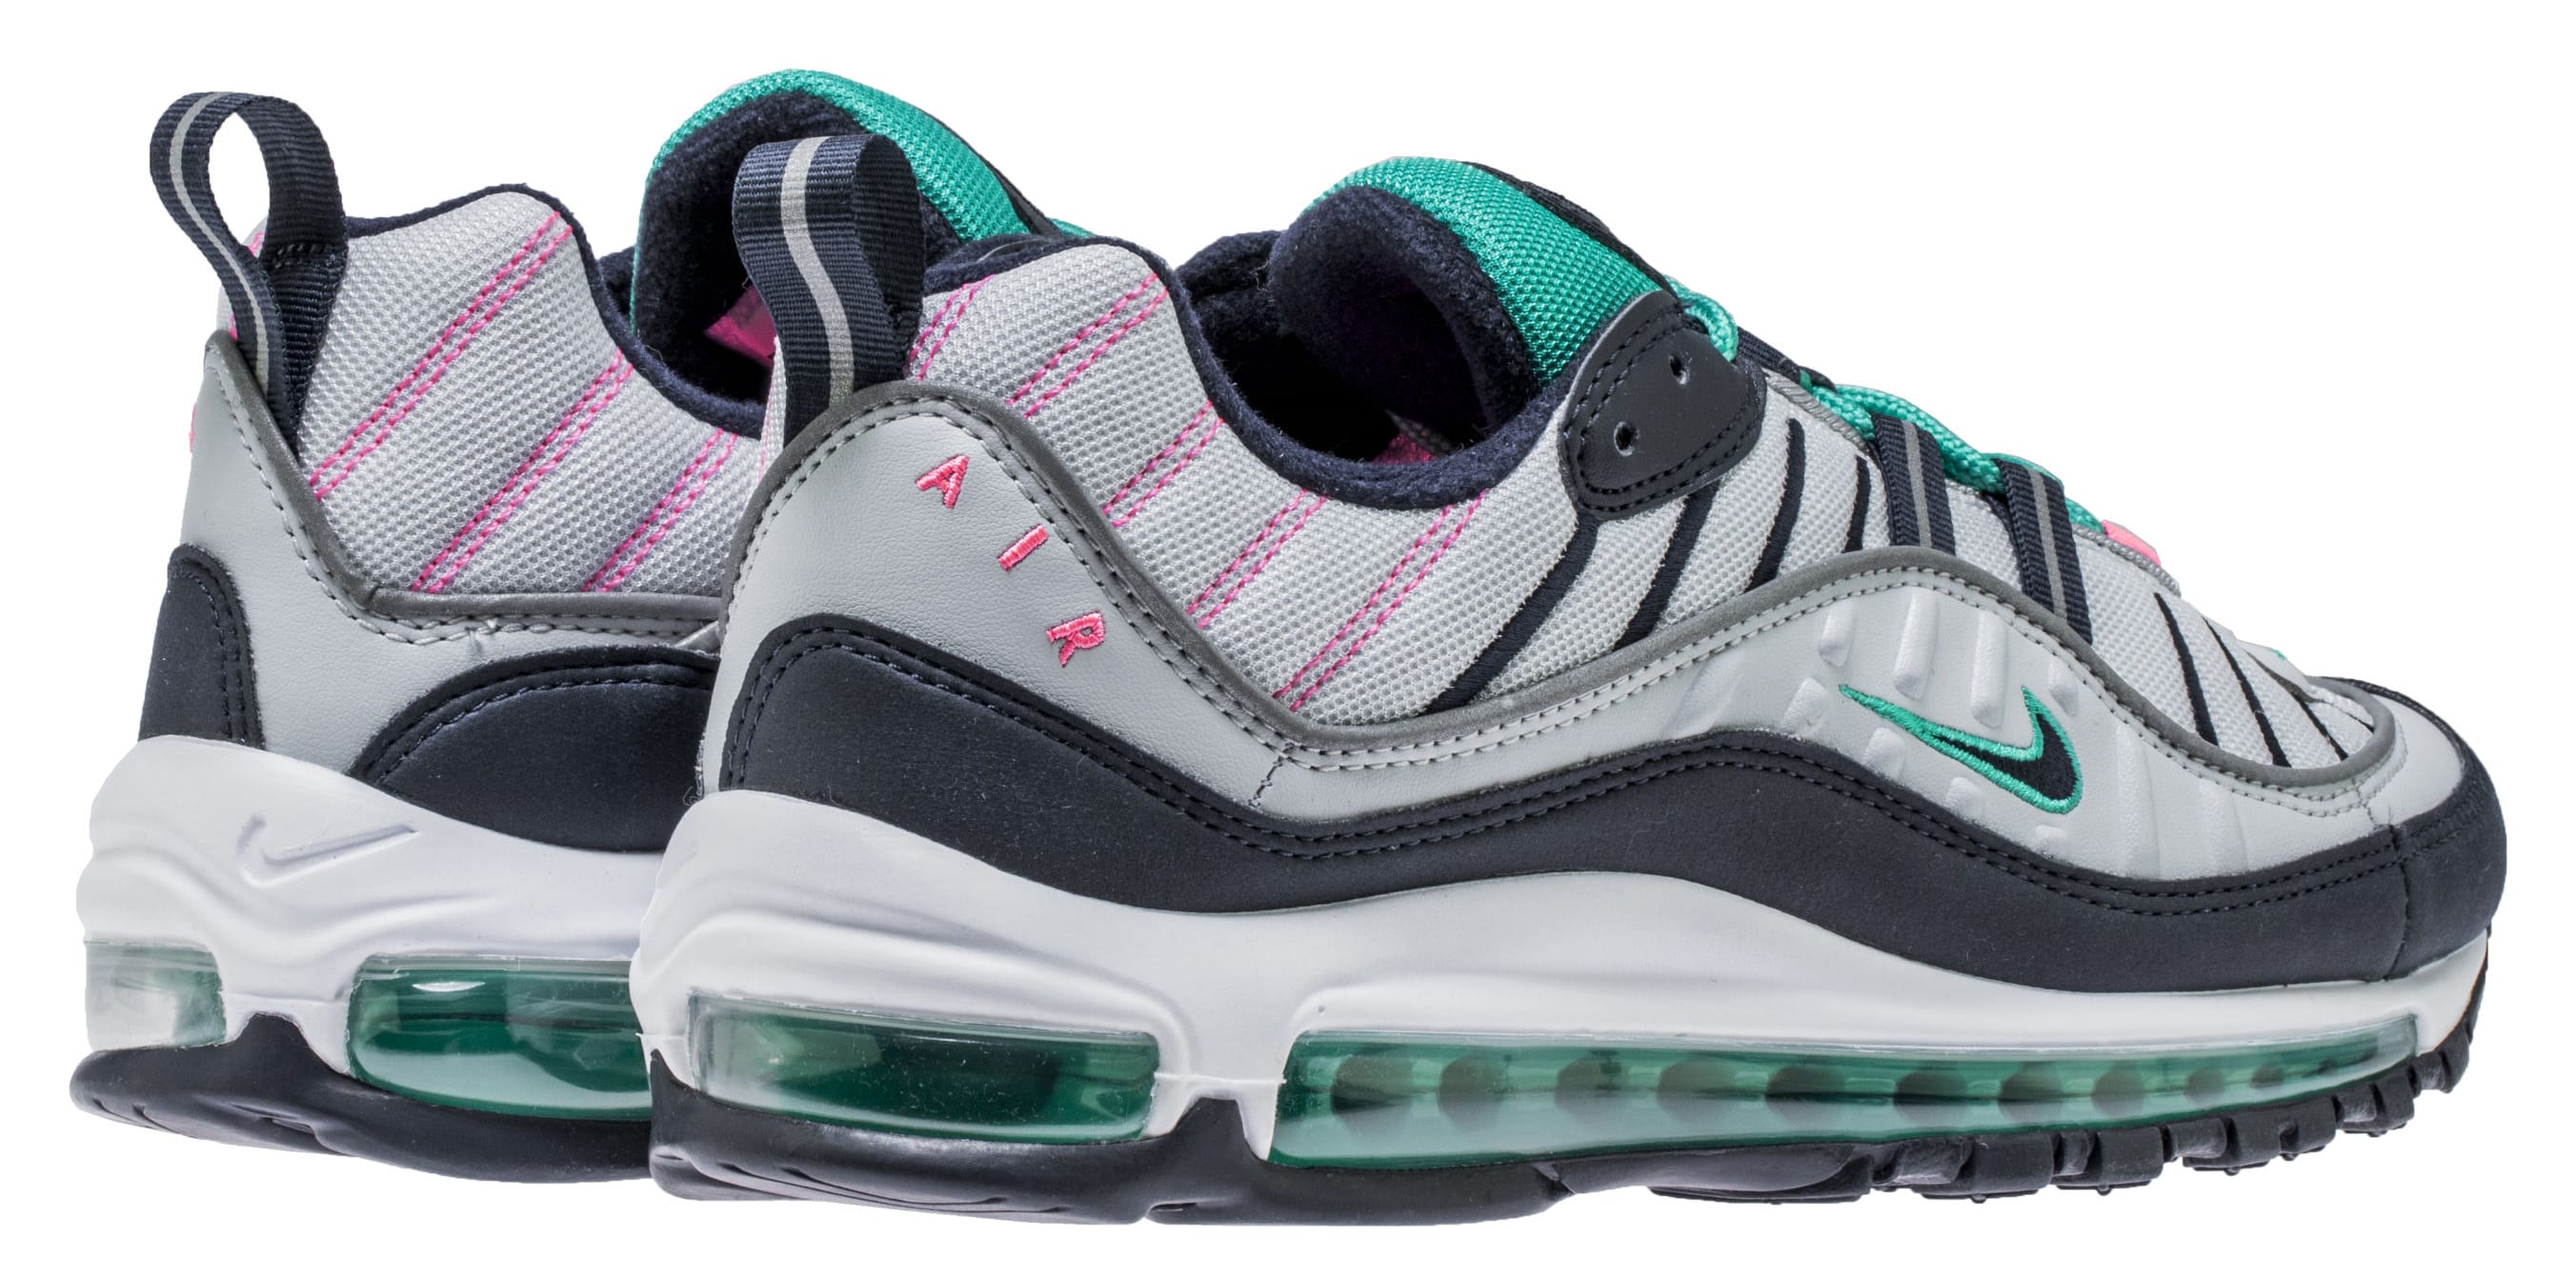 Resident housewife to add Nike Air Max 98 South Beach 'Pure Platinum/Obsidian/Kinetic Green'  640744-005 Release Date | Sole Collector